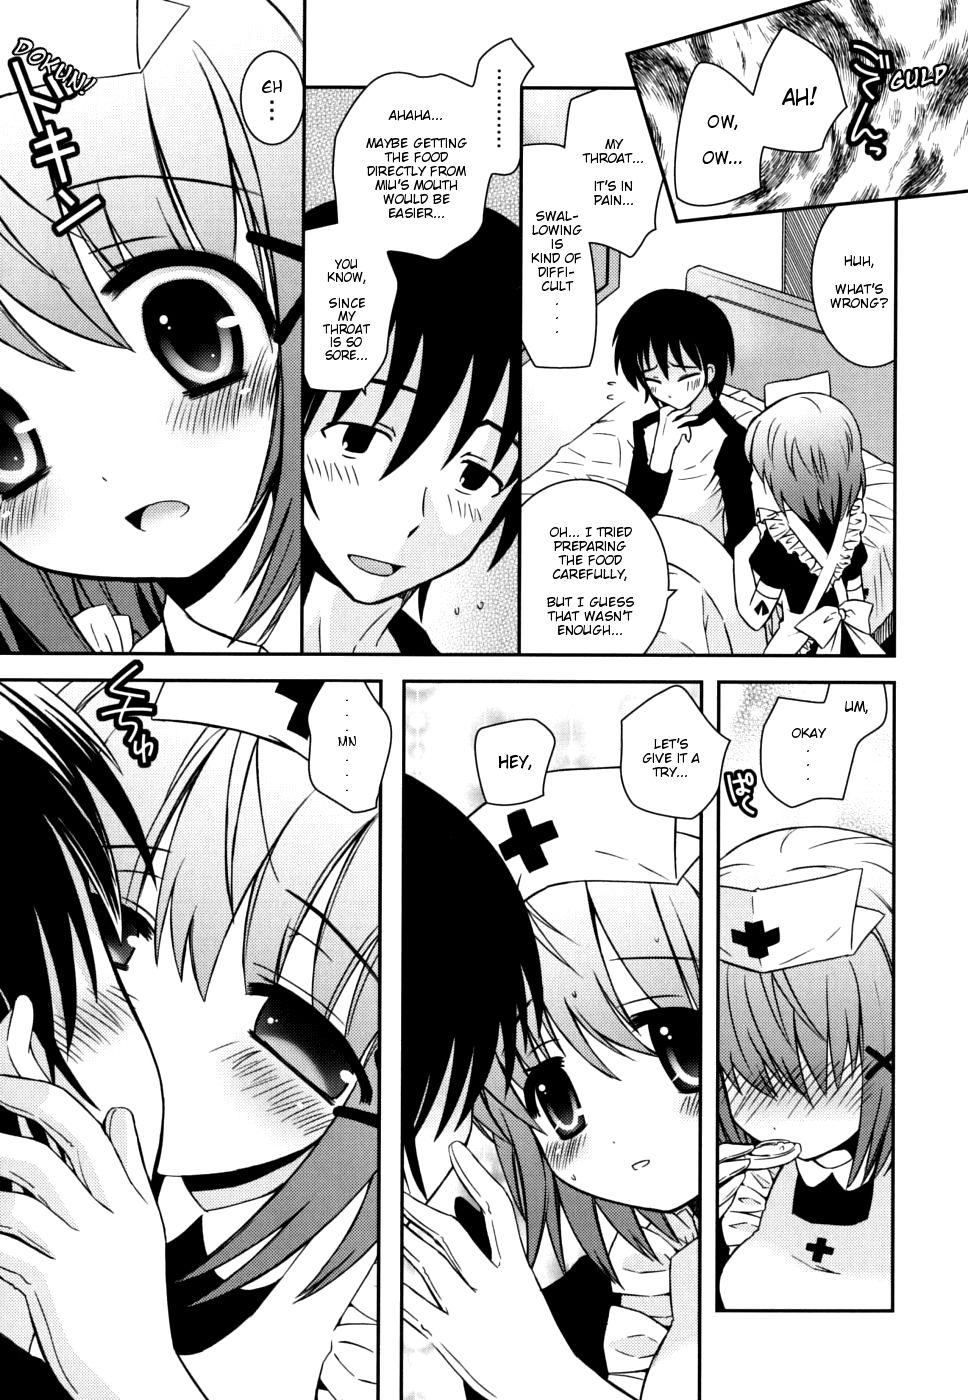 Hot Girl Imouto Pandemic! - Younger sister Pandemic Flaca - Page 5